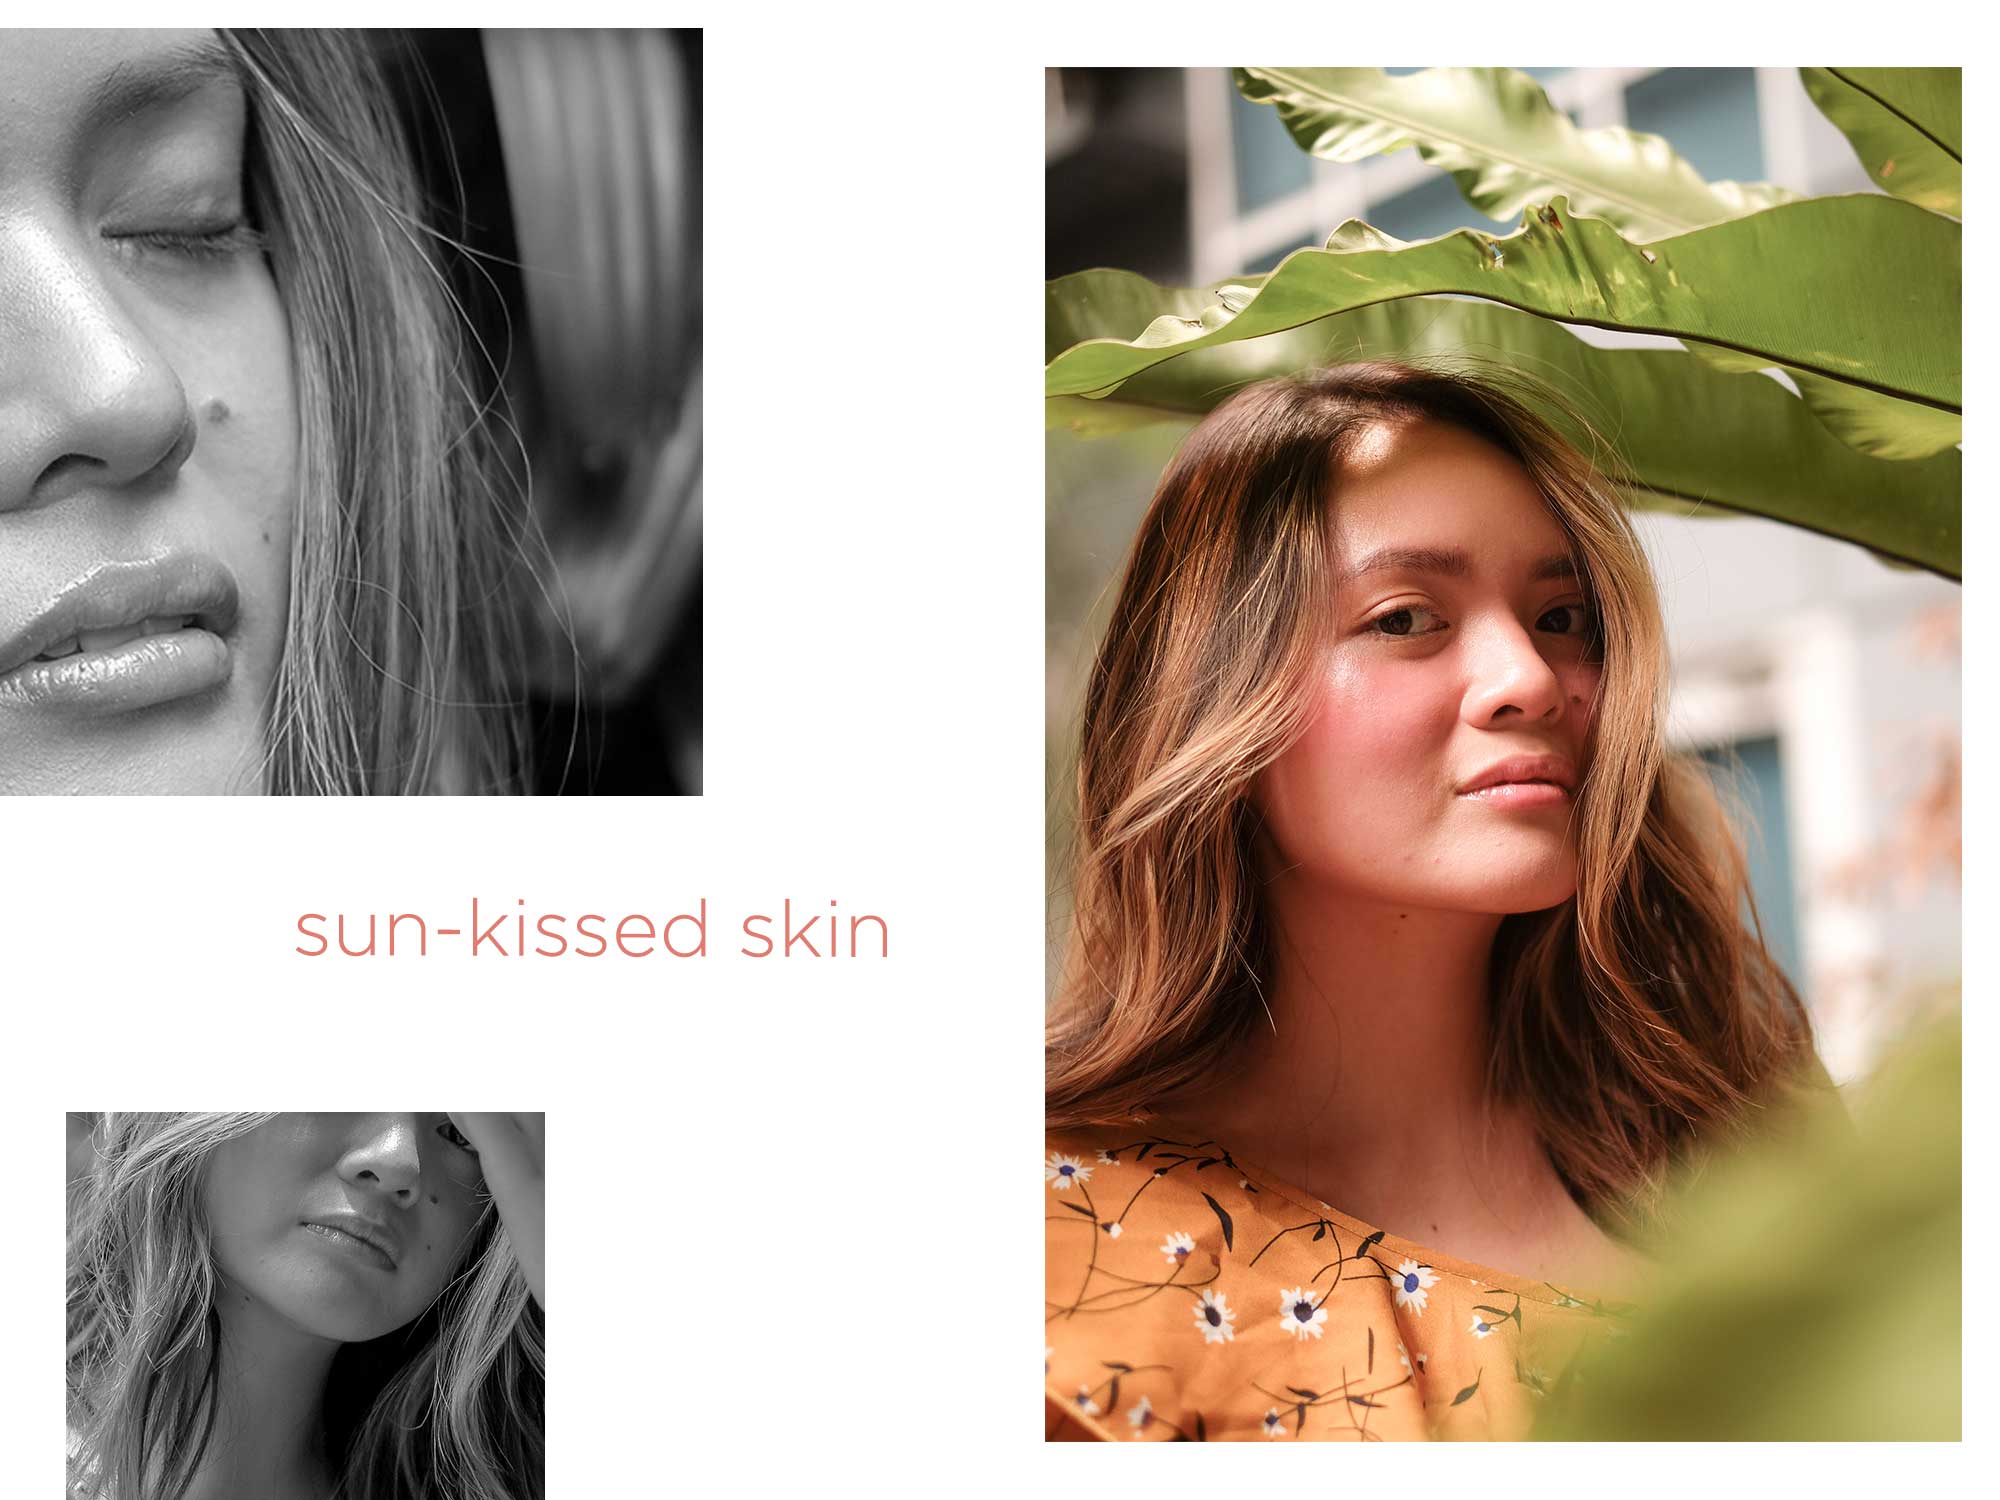 3 Ways To Get That Summer Glow Without The Sun